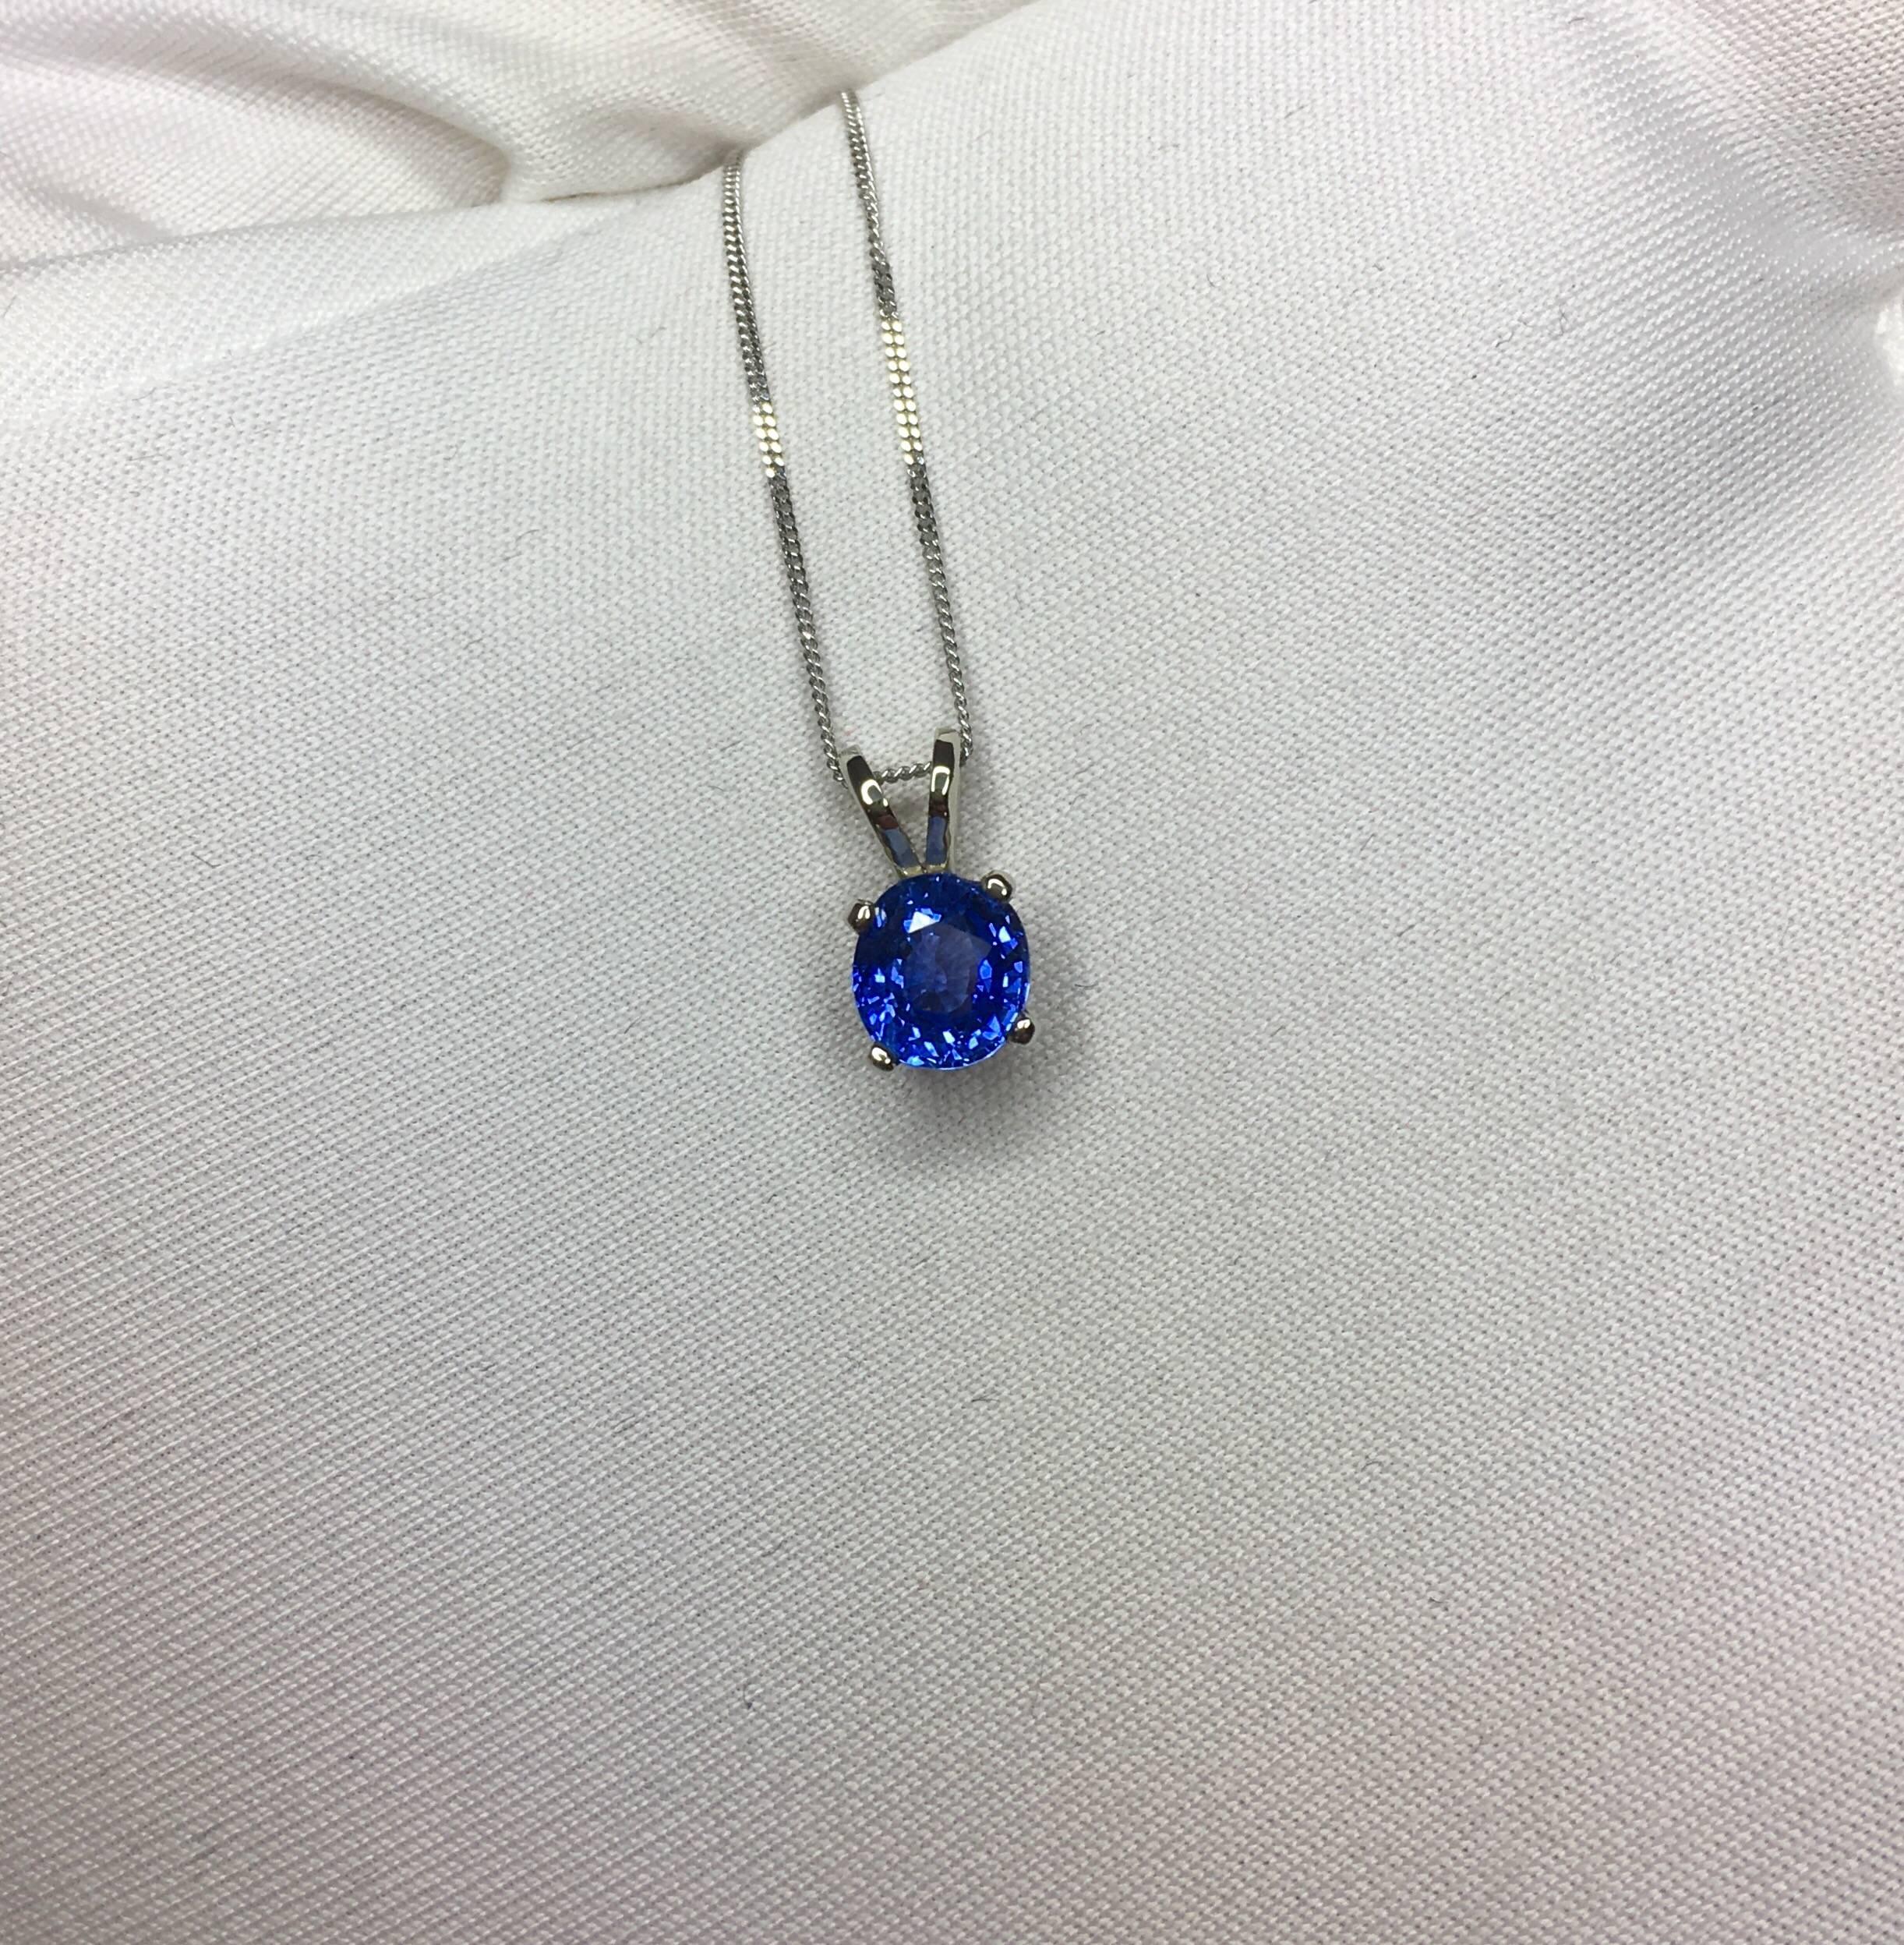 Beautiful natural 1.07 carat blue Sapphire set in a fine 18k white gold solitaire pendant.

Stunning blue sapphire with fine cornflower blue colour and excellent clarity.

It also has an excellent oval cut which shows lots of brightness and light